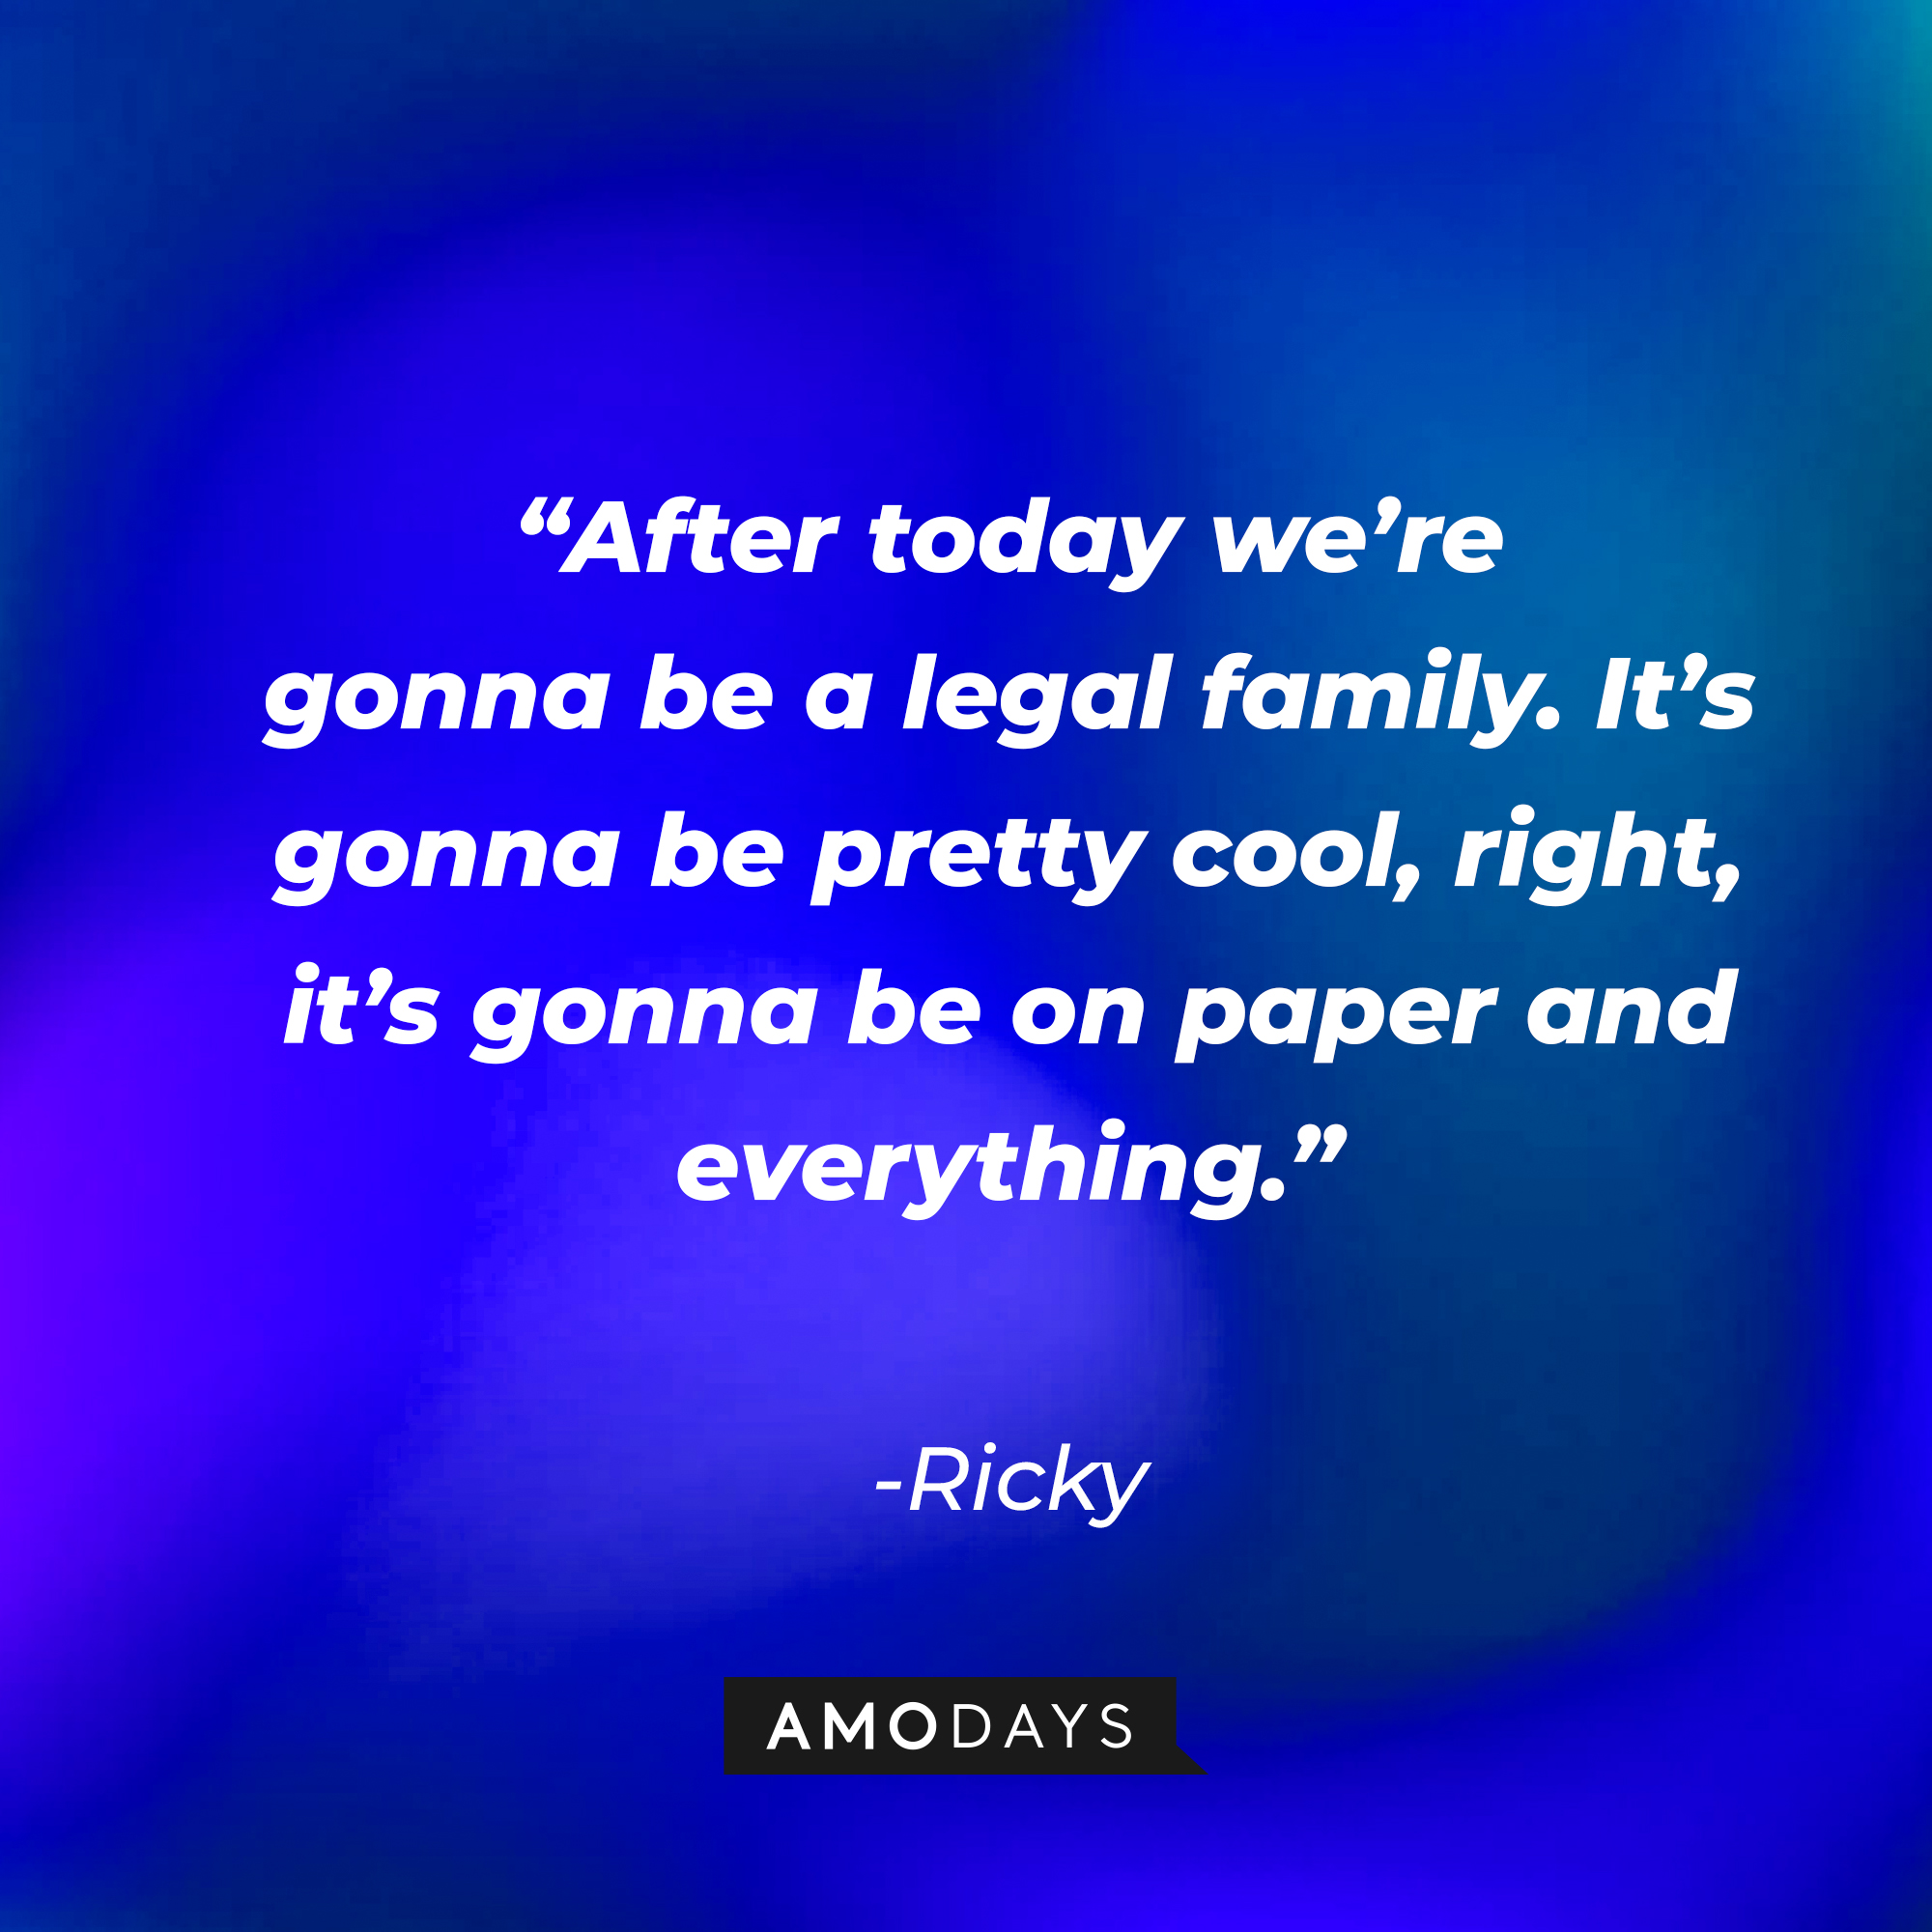 Ricky's quote: “After today we’re gonna be a legal family. It’s gonna be pretty cool, right, it’s gonna be on paper and everything.” | Source: Amodays